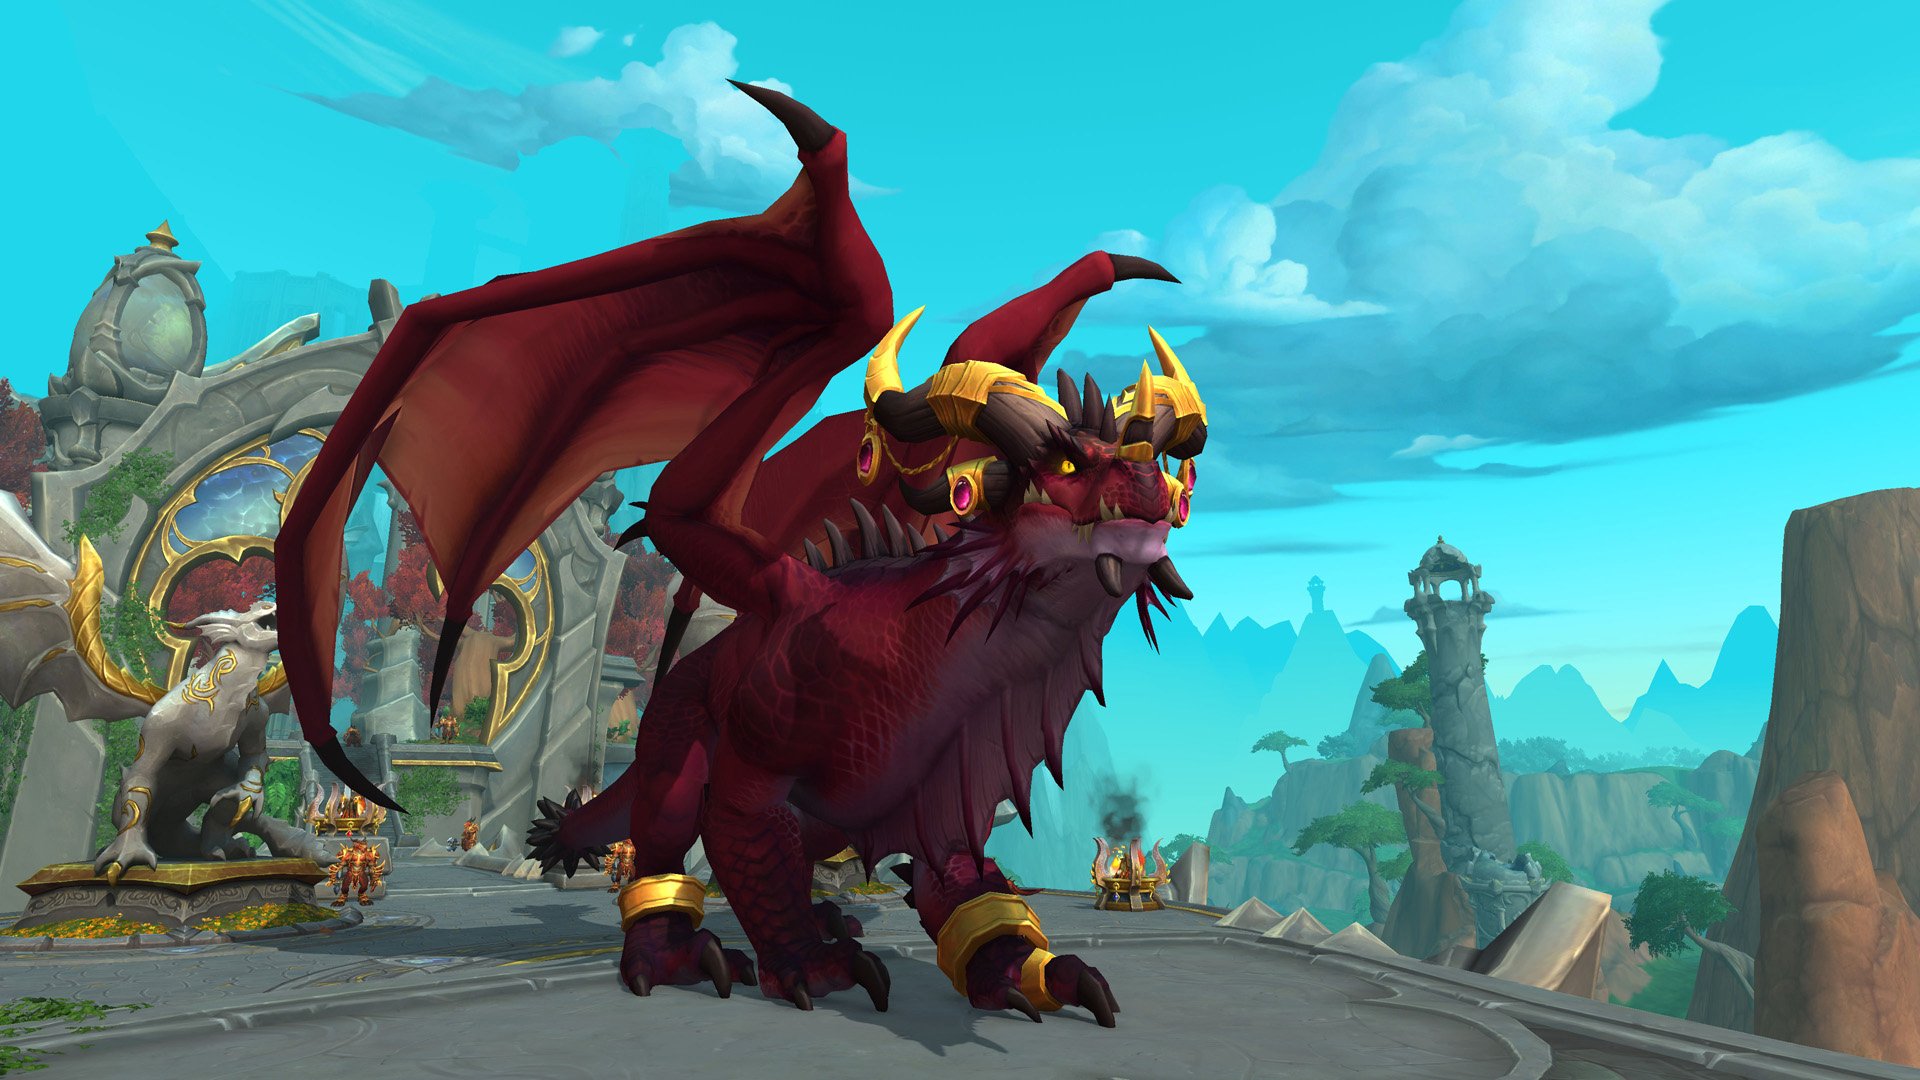 World of Warcraft: Dragonflight has a real chance to make WoW grow again